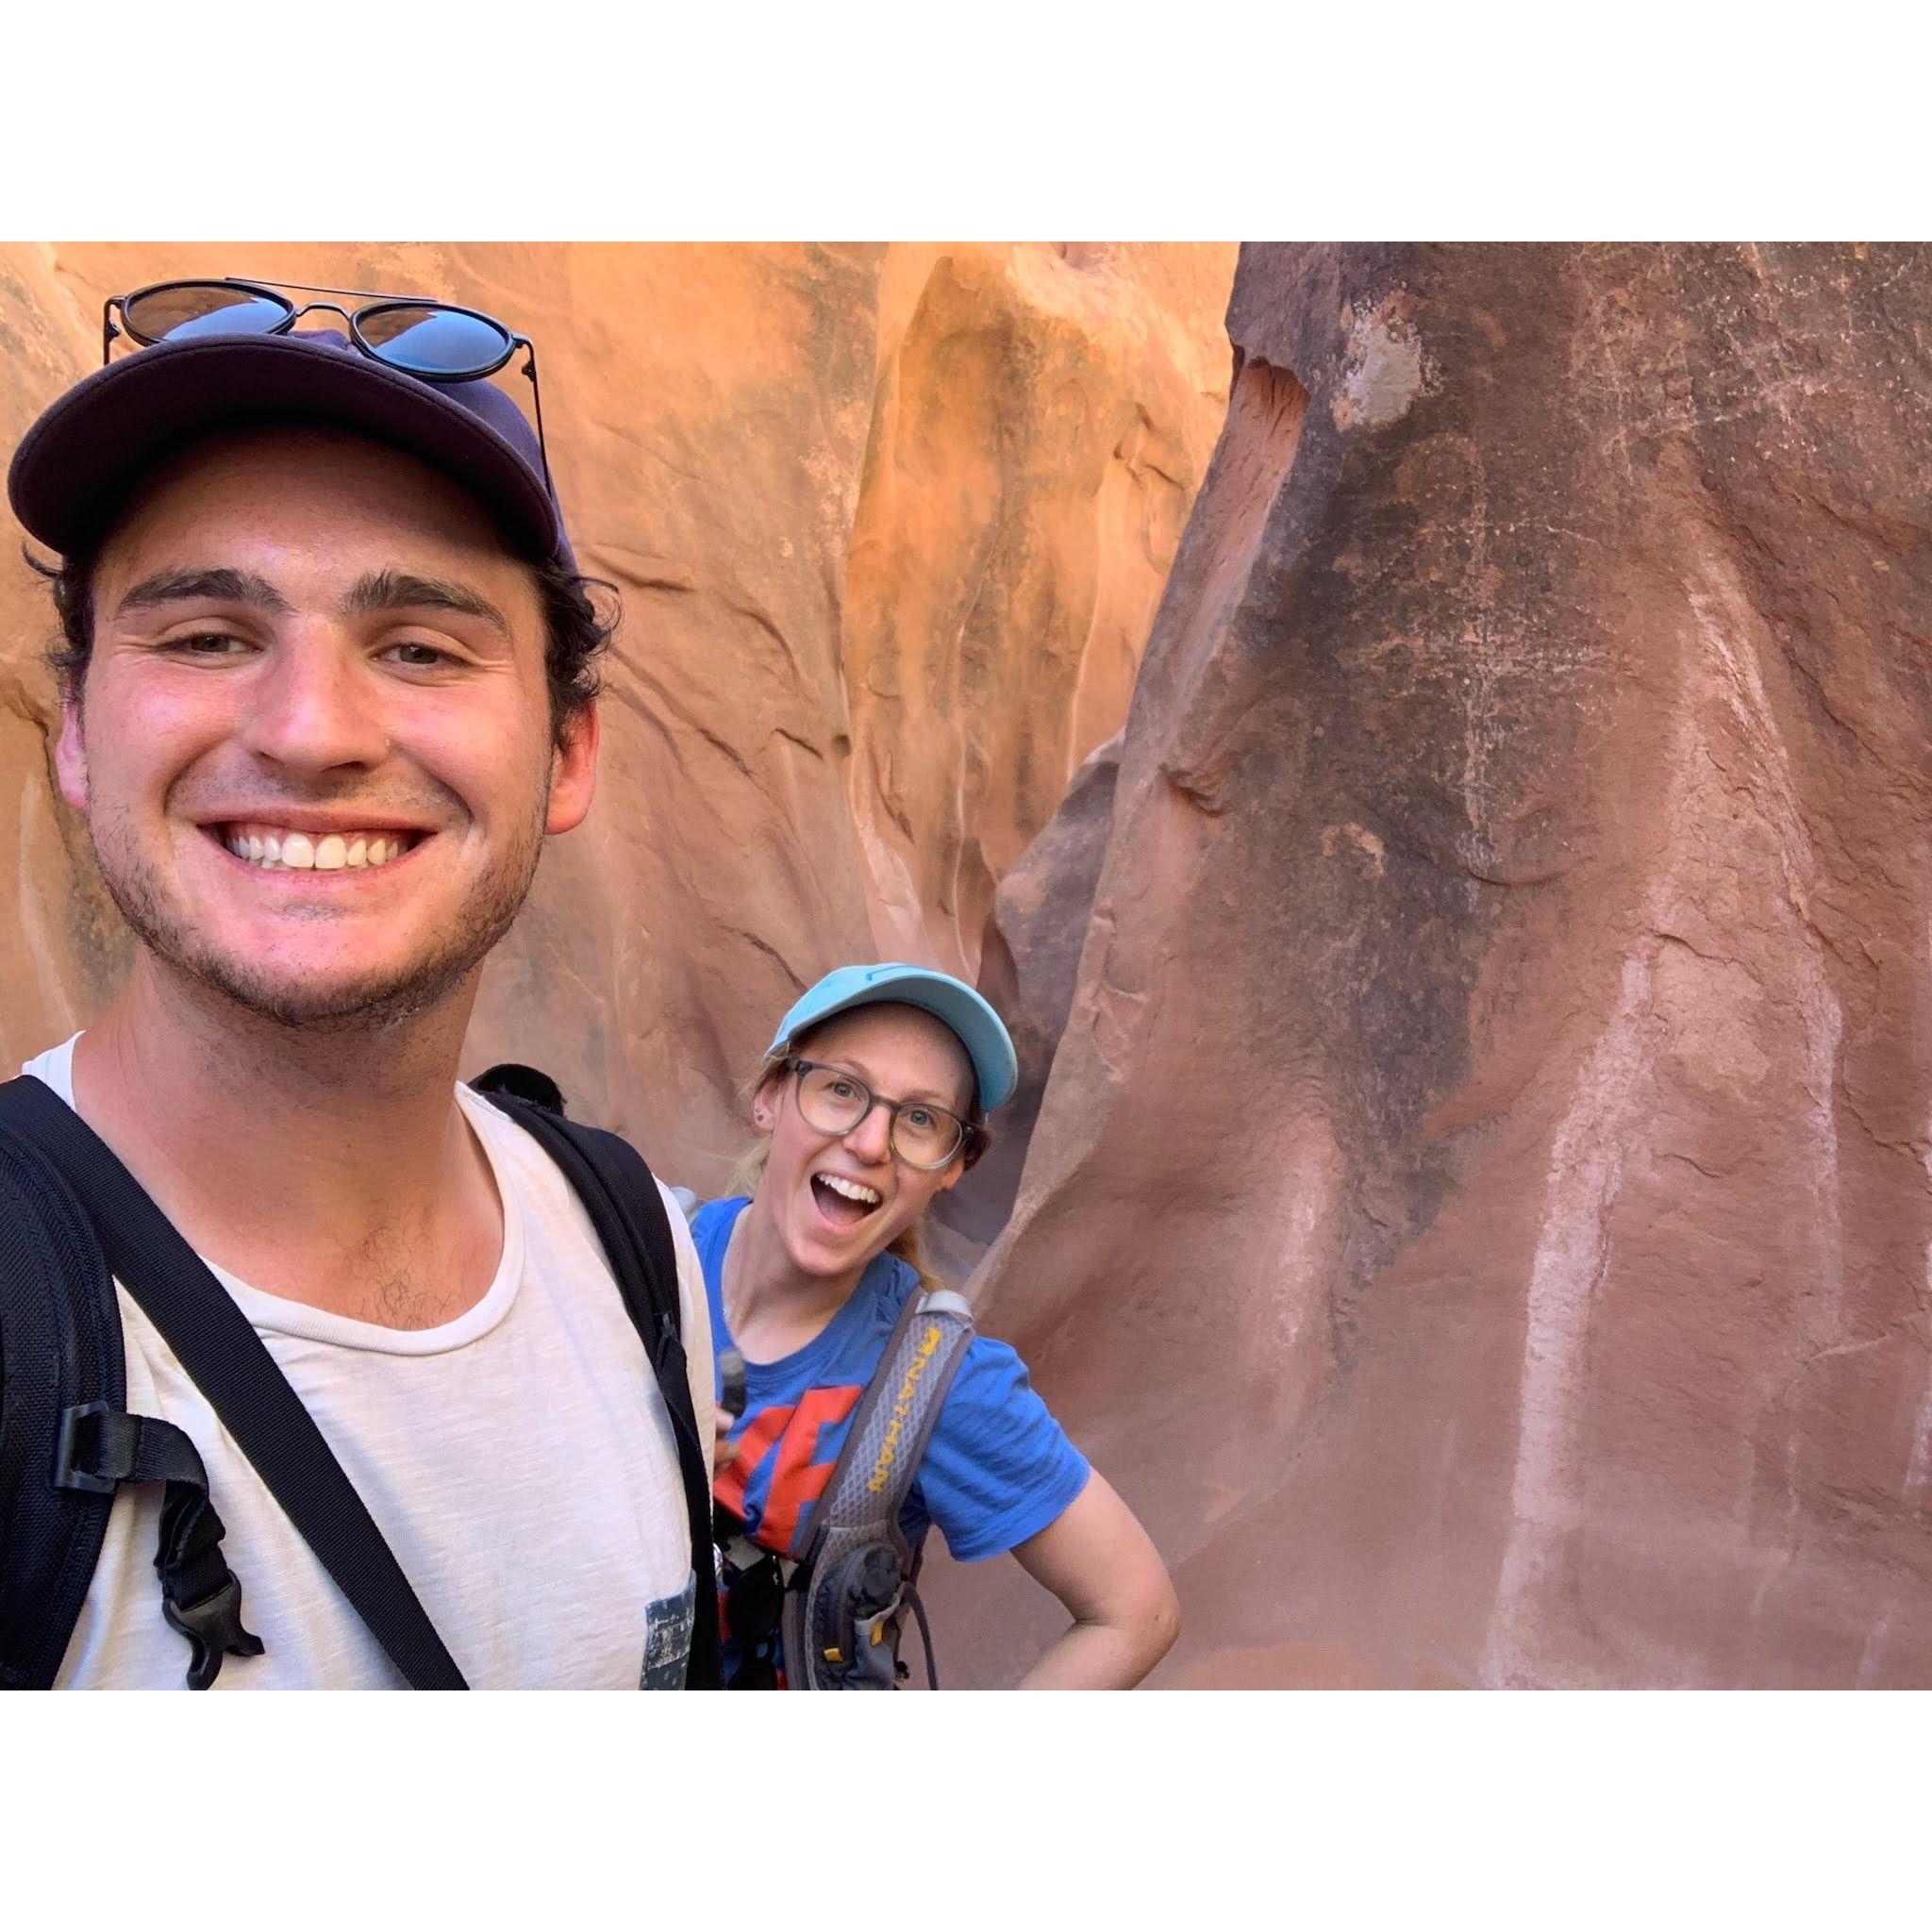 Our adventure in the Slot Canyon hike. Would not recommend to drive a lil ole Prius on a 14 mile unpaved road. As the night bus from Harry Potter would say, "It's gonna be a bumpy ride!"